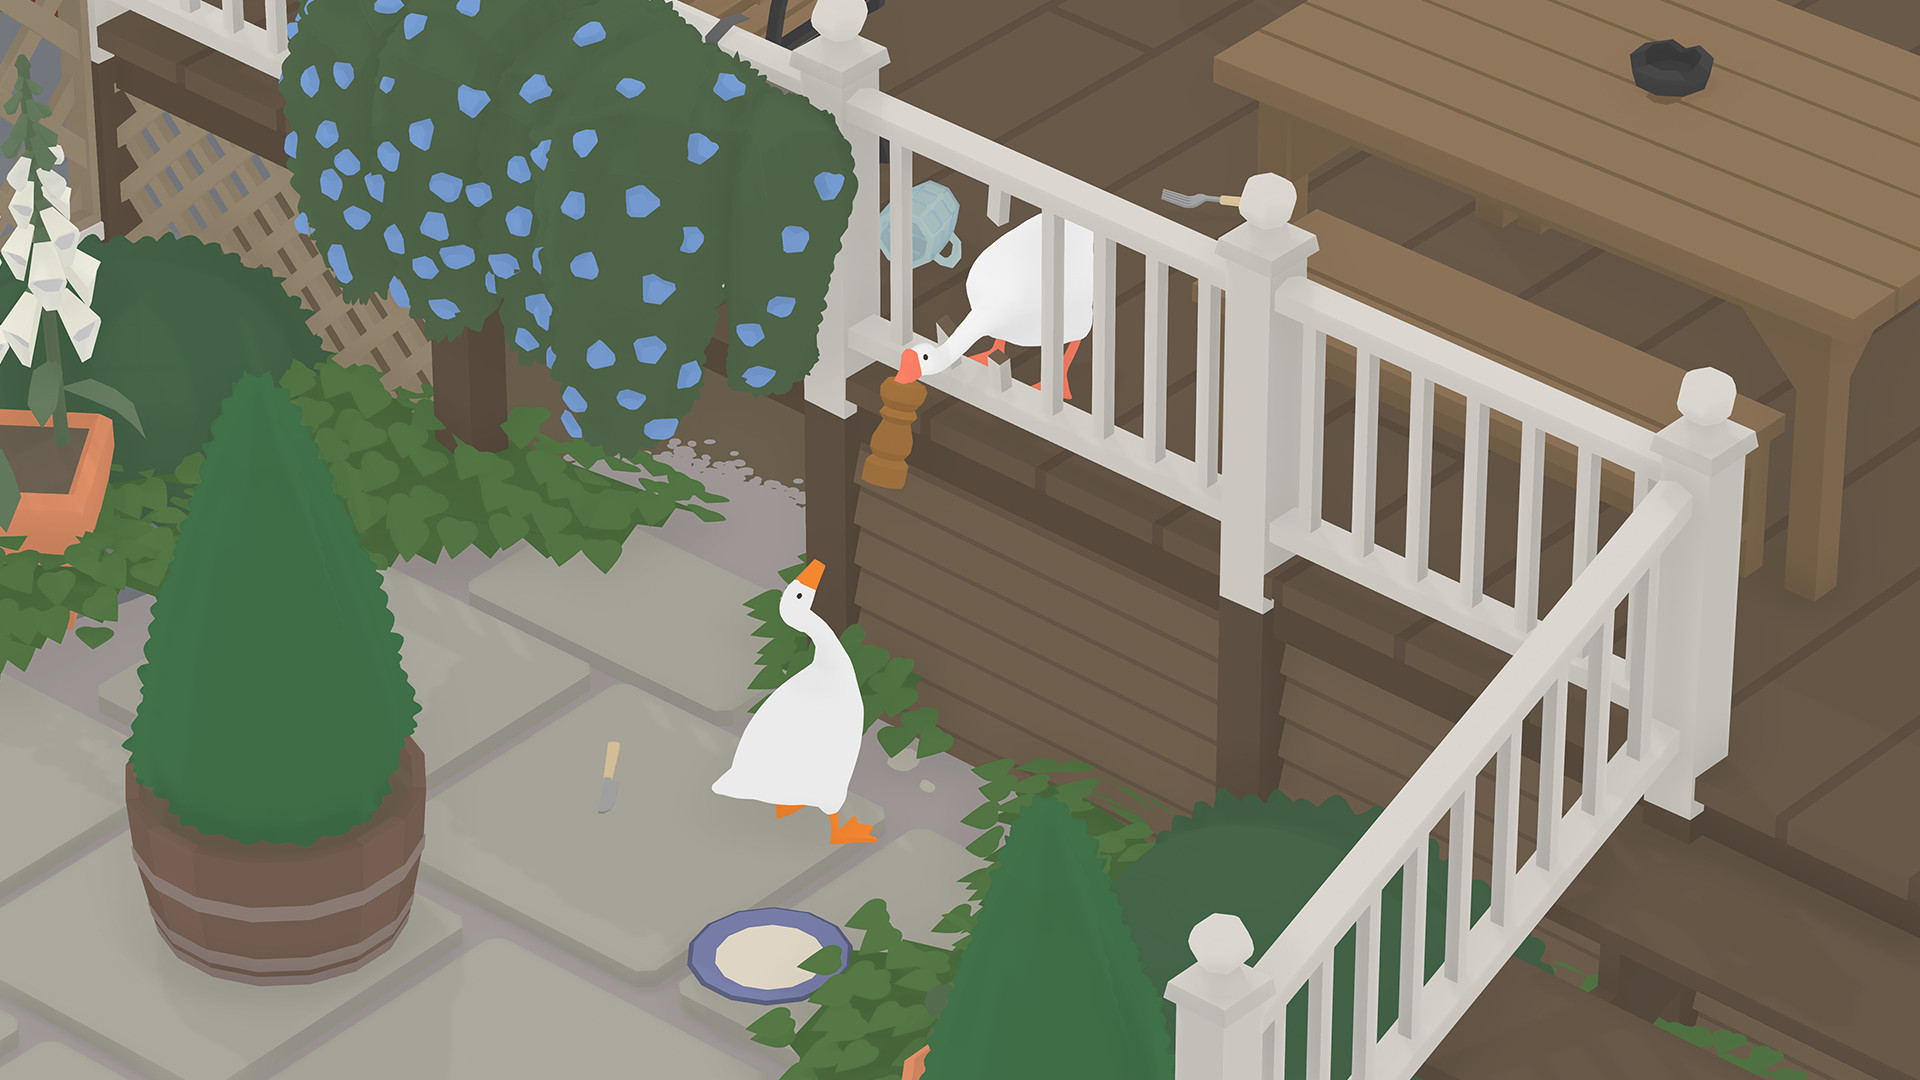 untitled goose game steam download free